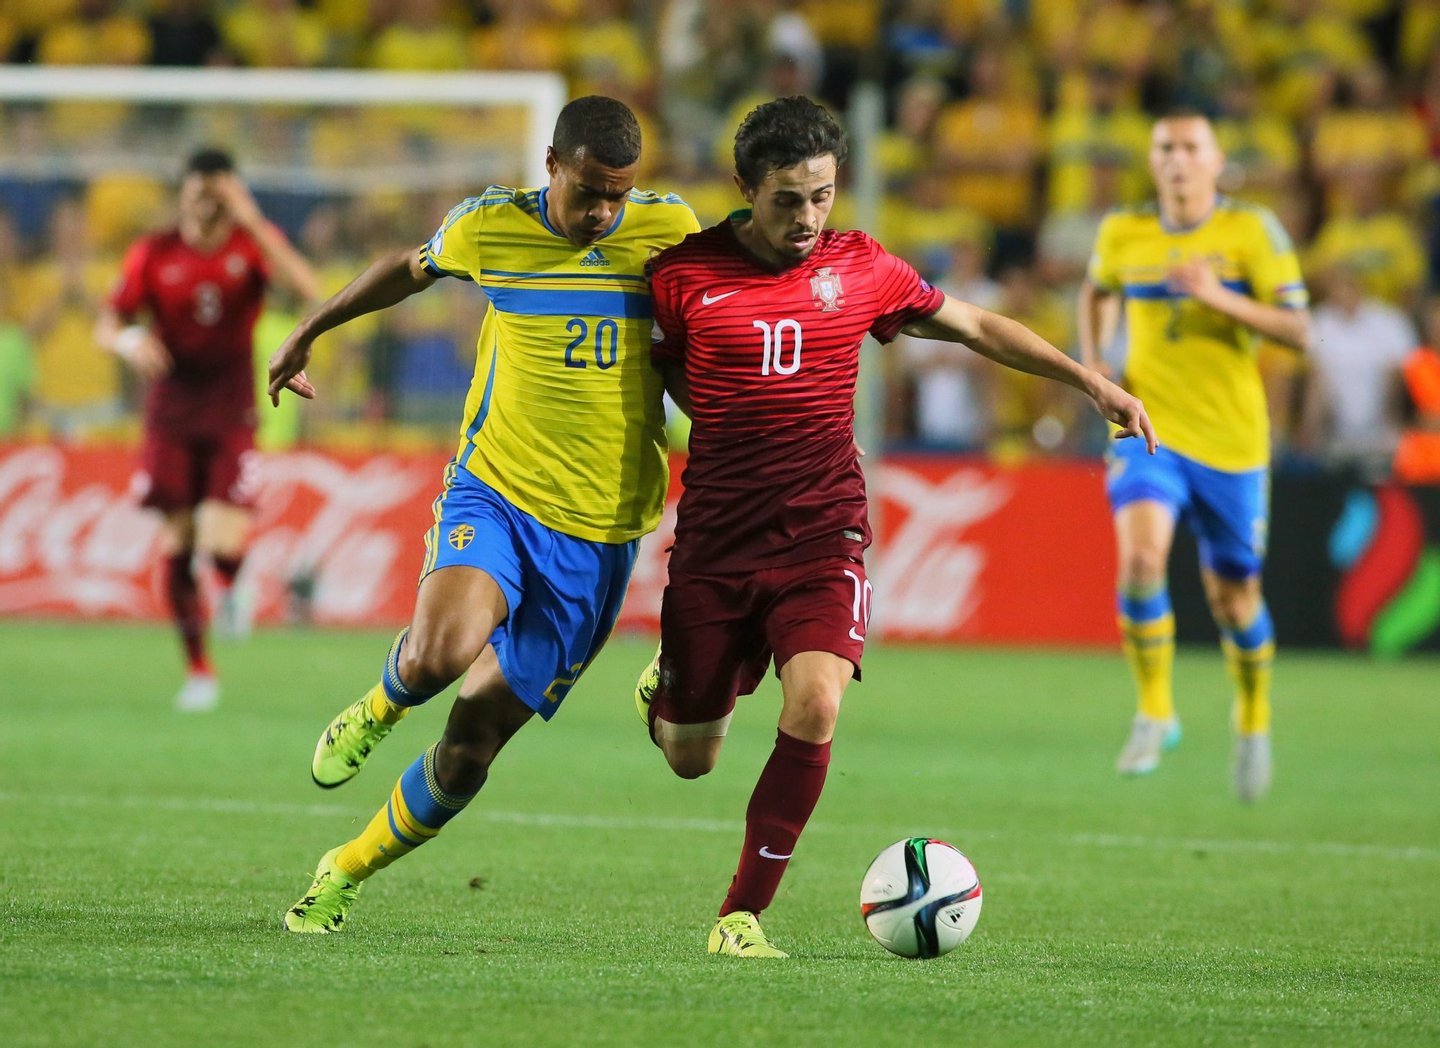 Portugal's Bernardo Silva (R) and Sweden's Robin Quaison vie for the ball during the UEFA Under 21 European Championship 2015 final football match between Sweden and Portugal in Prague on June 30, 2015. Sweden won the match 4:3 after penalty shoot-out. AFP PHOTO / MICHAL CIZEK (Photo credit should read MICHAL CIZEK/AFP/Getty Images)